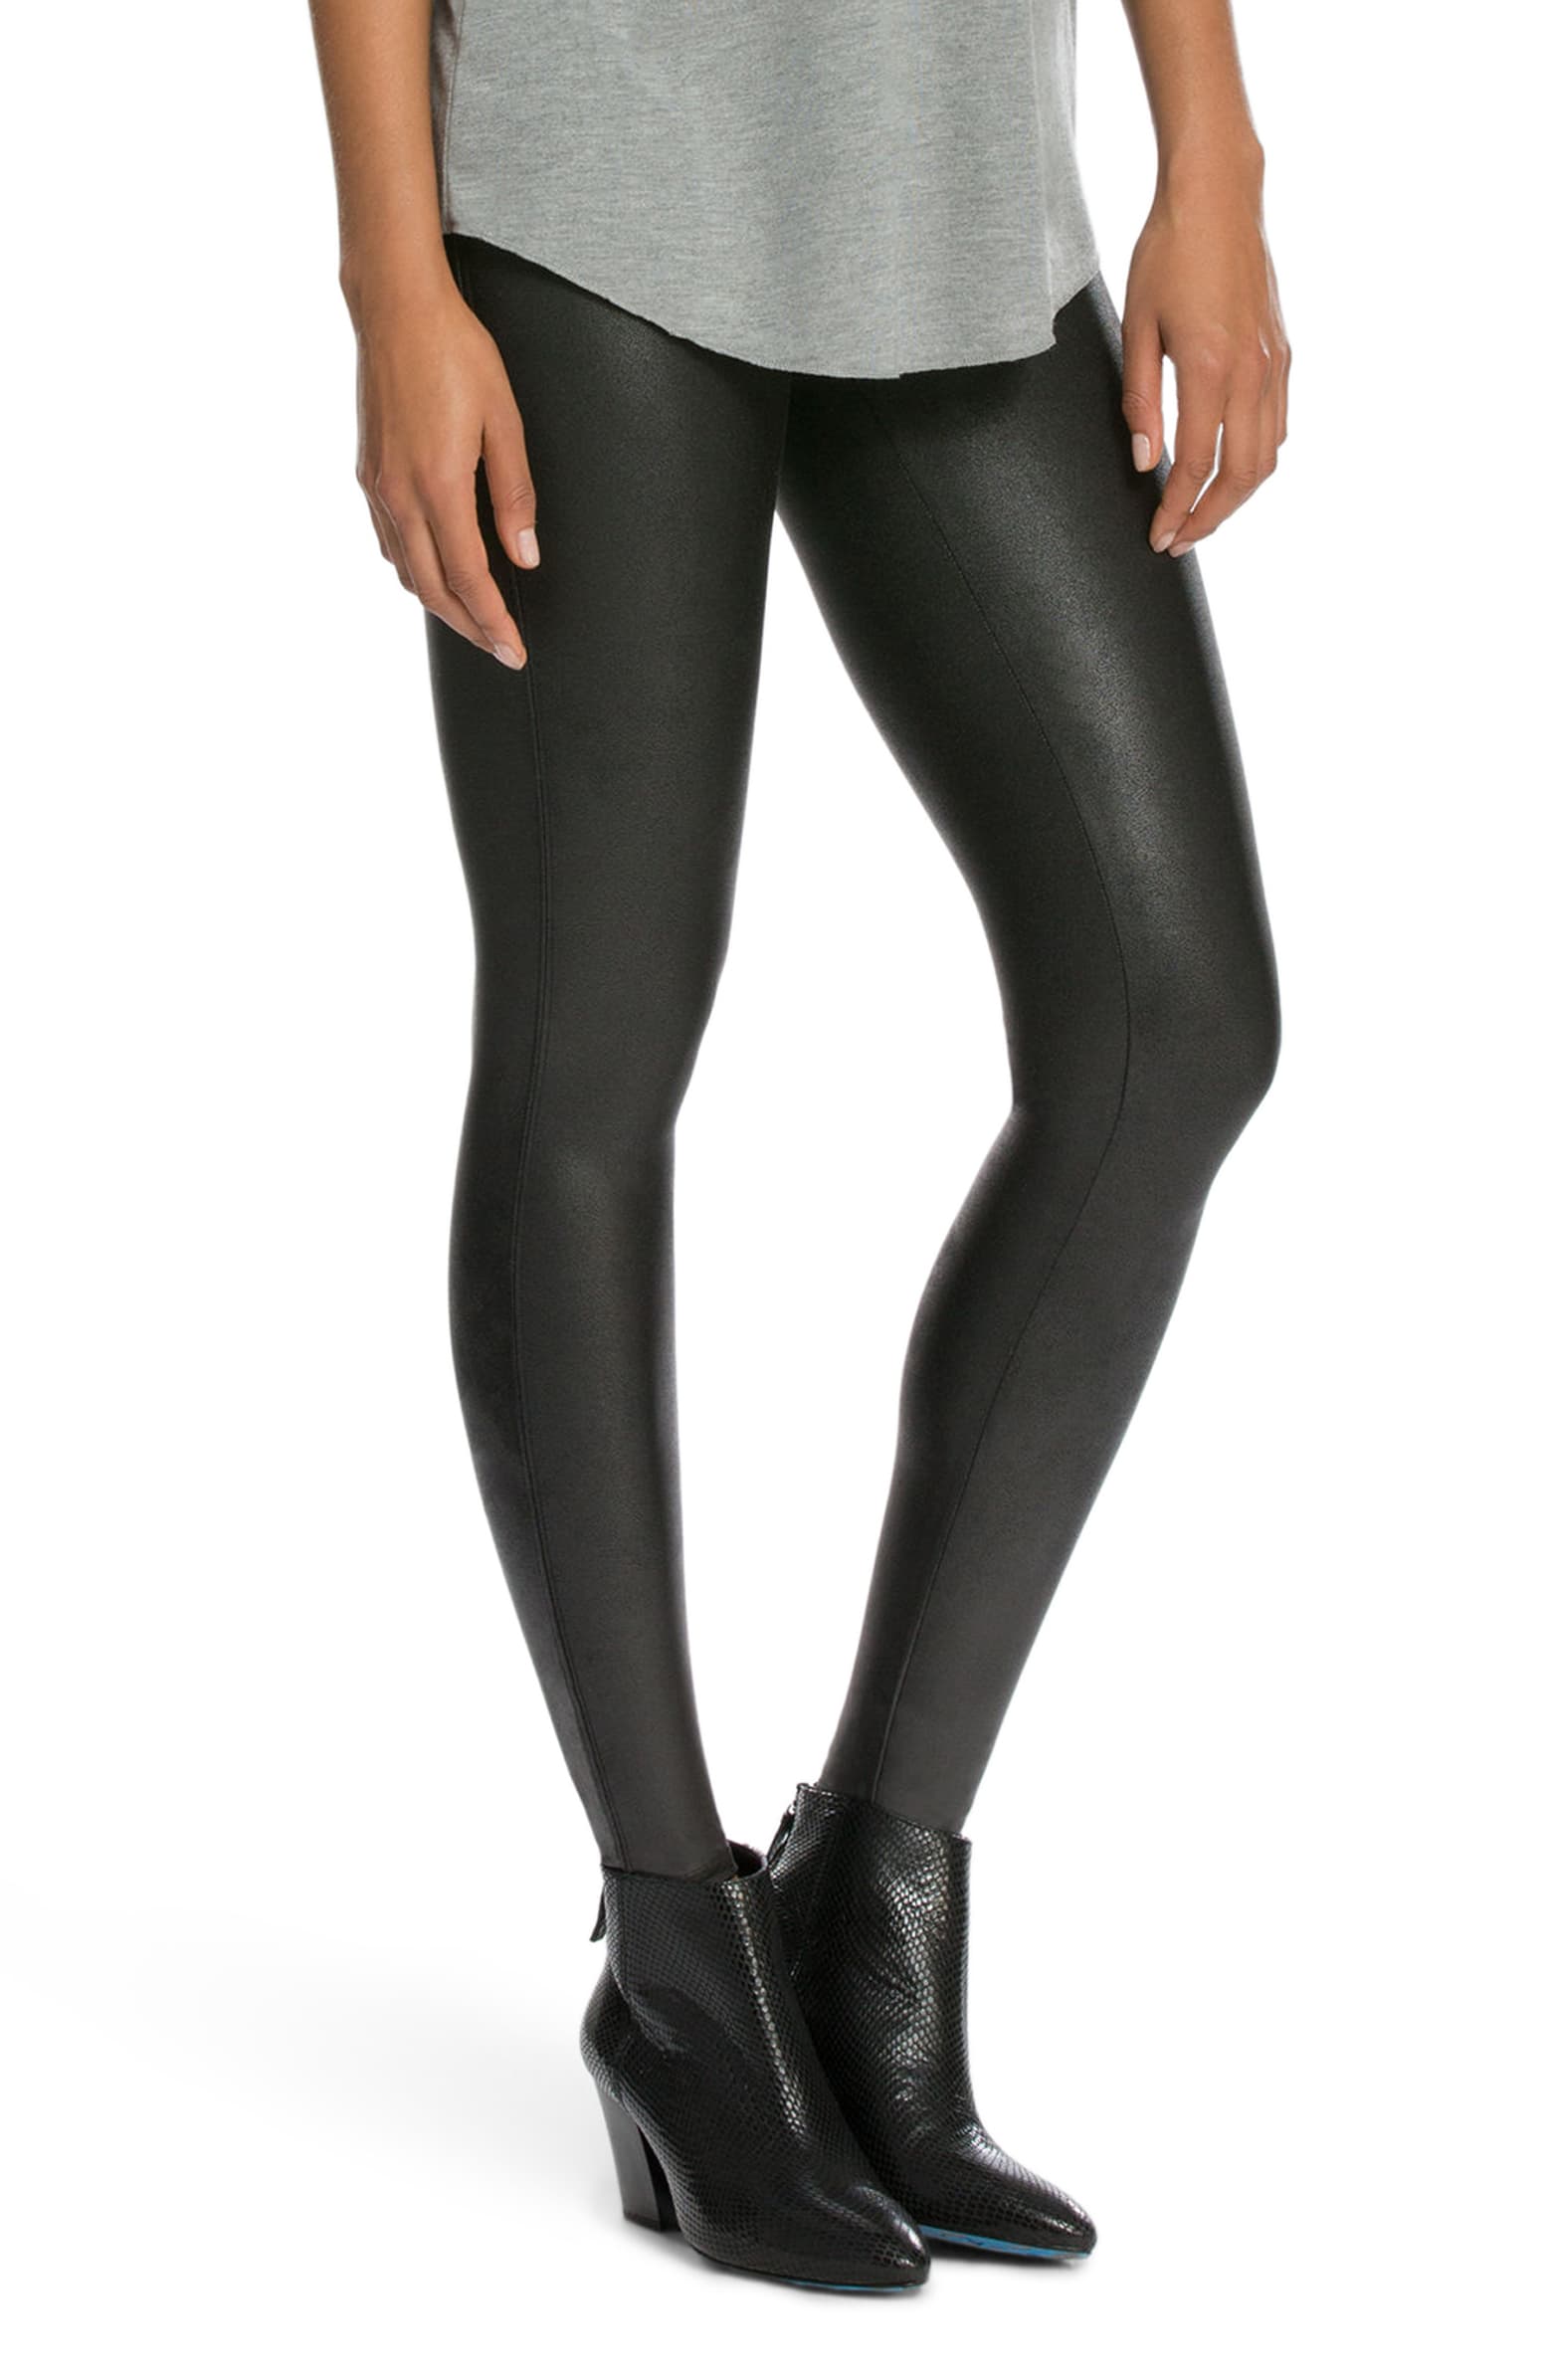 The Super Flattering Spanx Leggings You Should Buy Immediately At